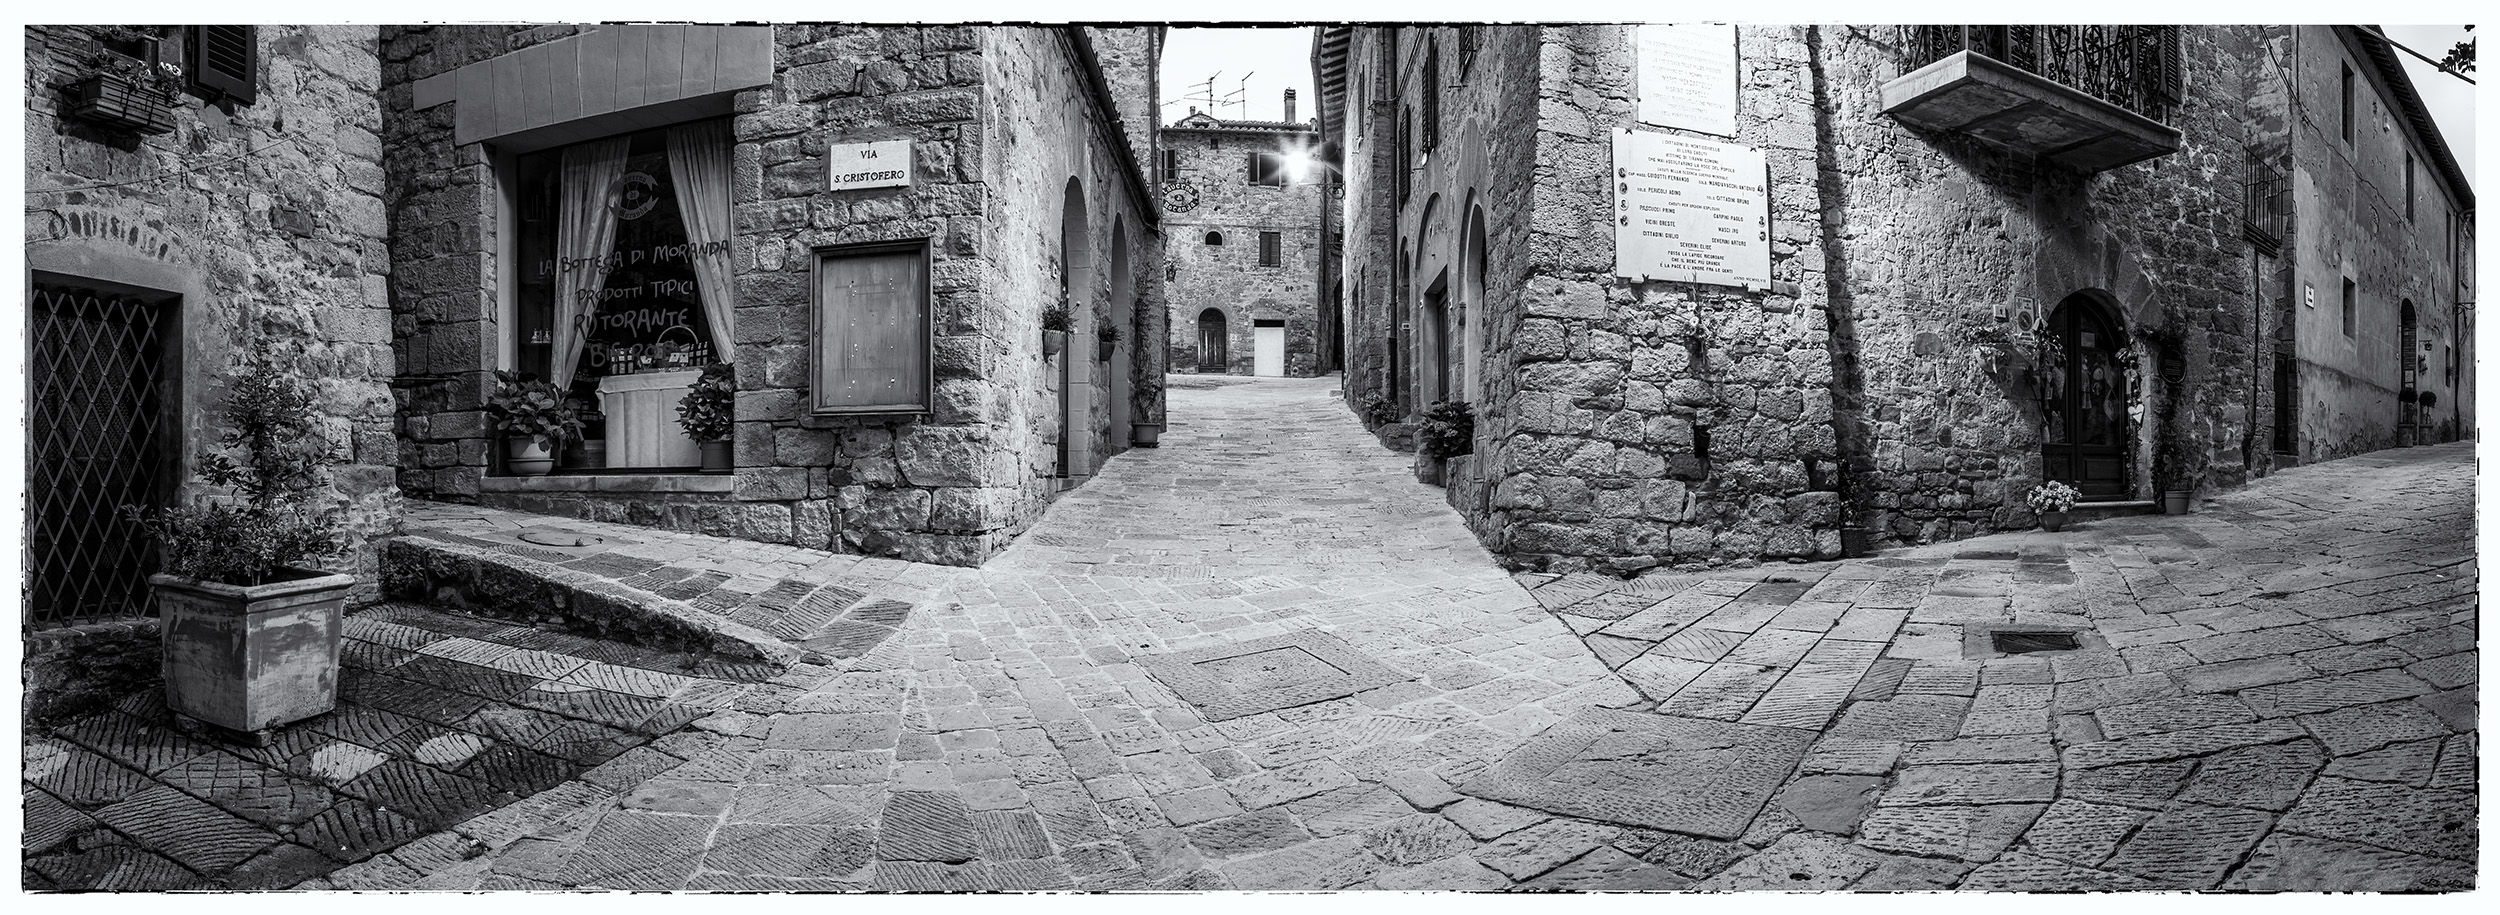 In the heart of Monticchiello, Tuscany, Italy, I captured this Black & White panoramic image, a mosaic of choices through the...